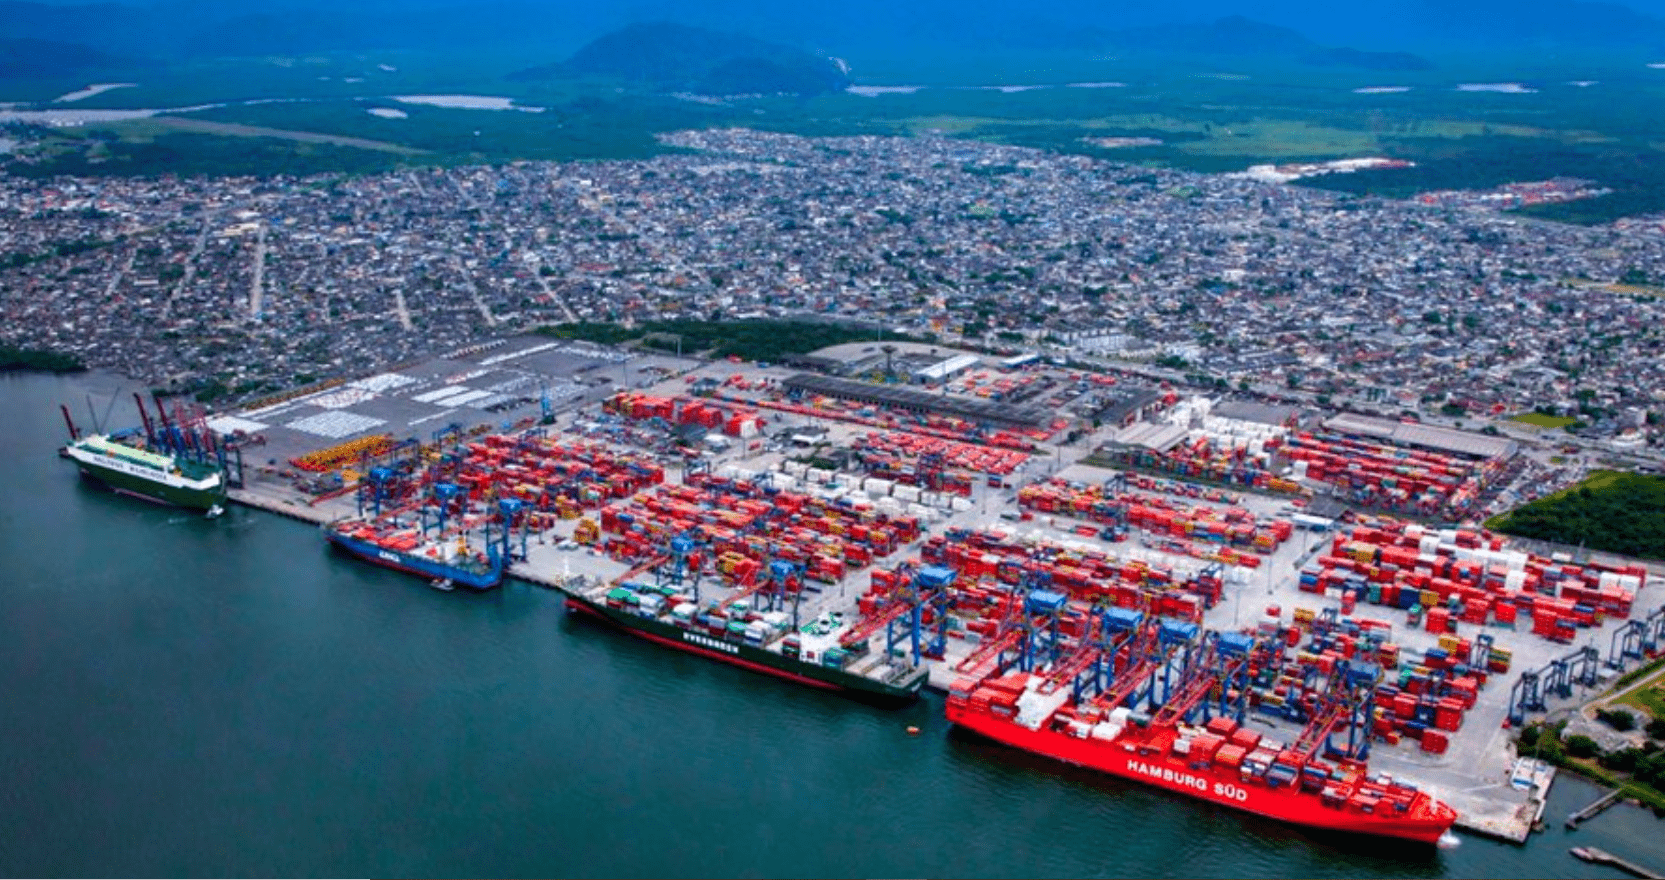 Port of Santos eyes IoT technology to increase efficiency - Container News